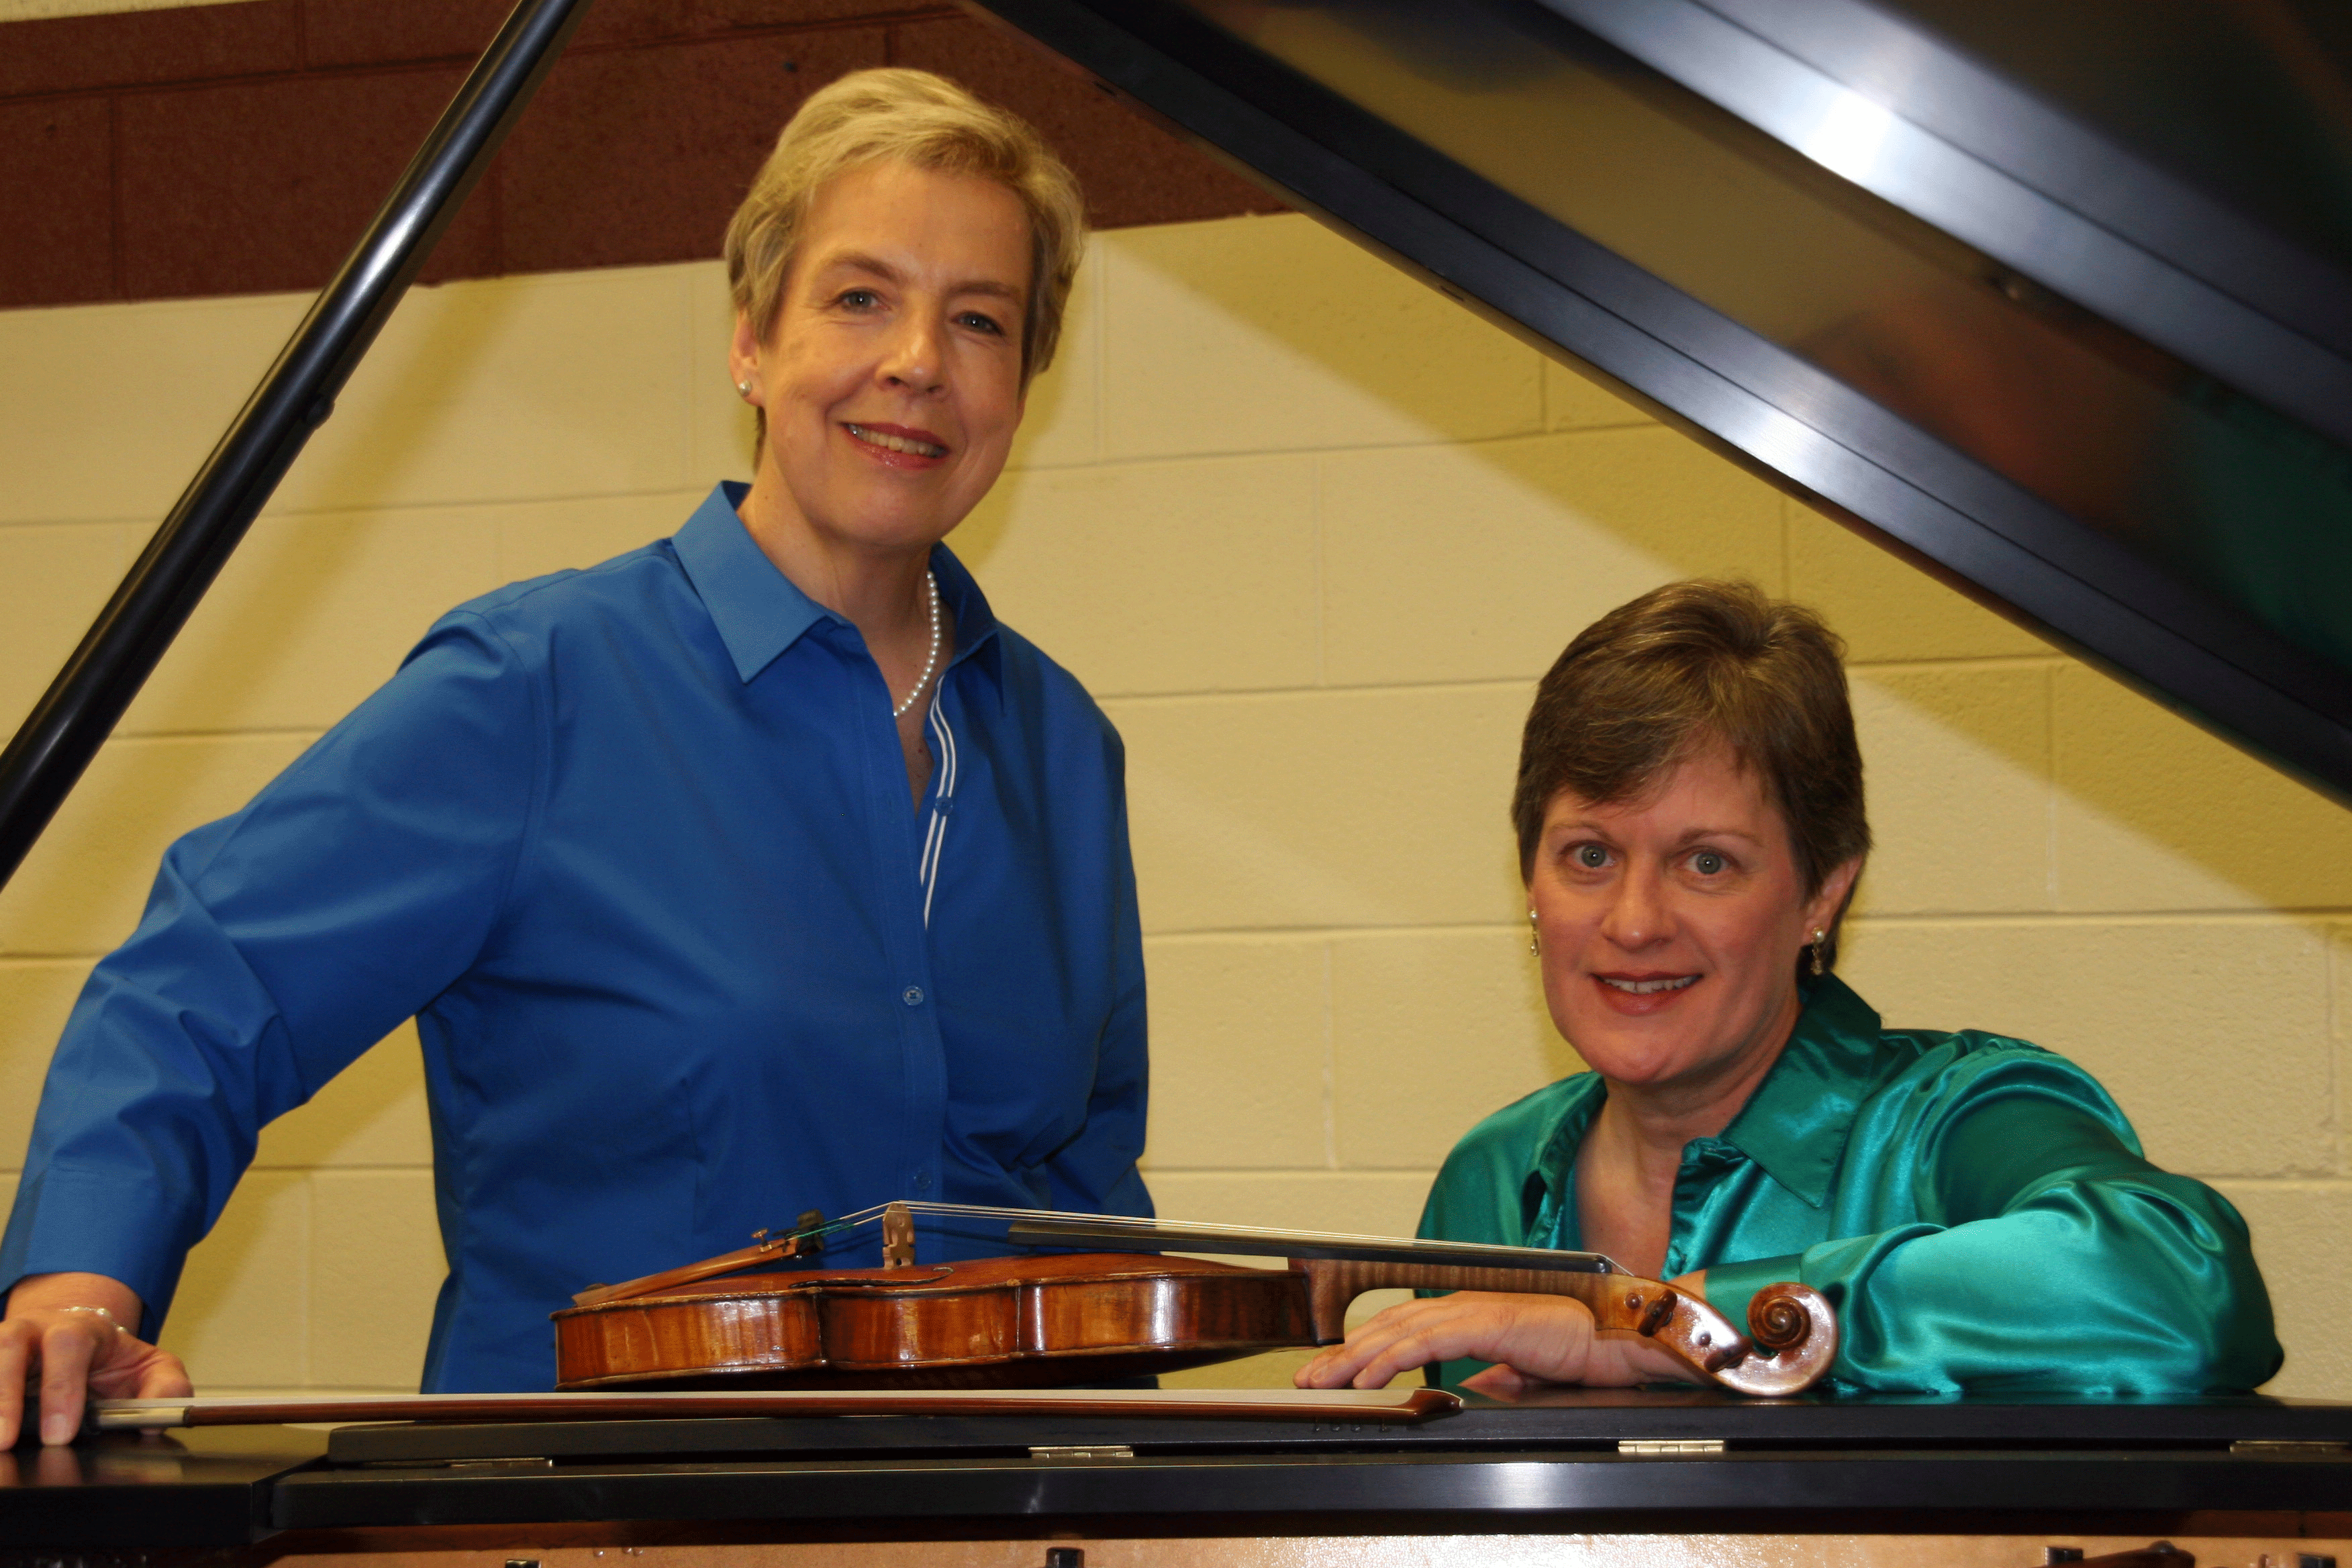 Mariposa consists of violinist Sandra McDonald (left), and violinist Linda Holzer (right). Photo by Peggy Harstvedt.